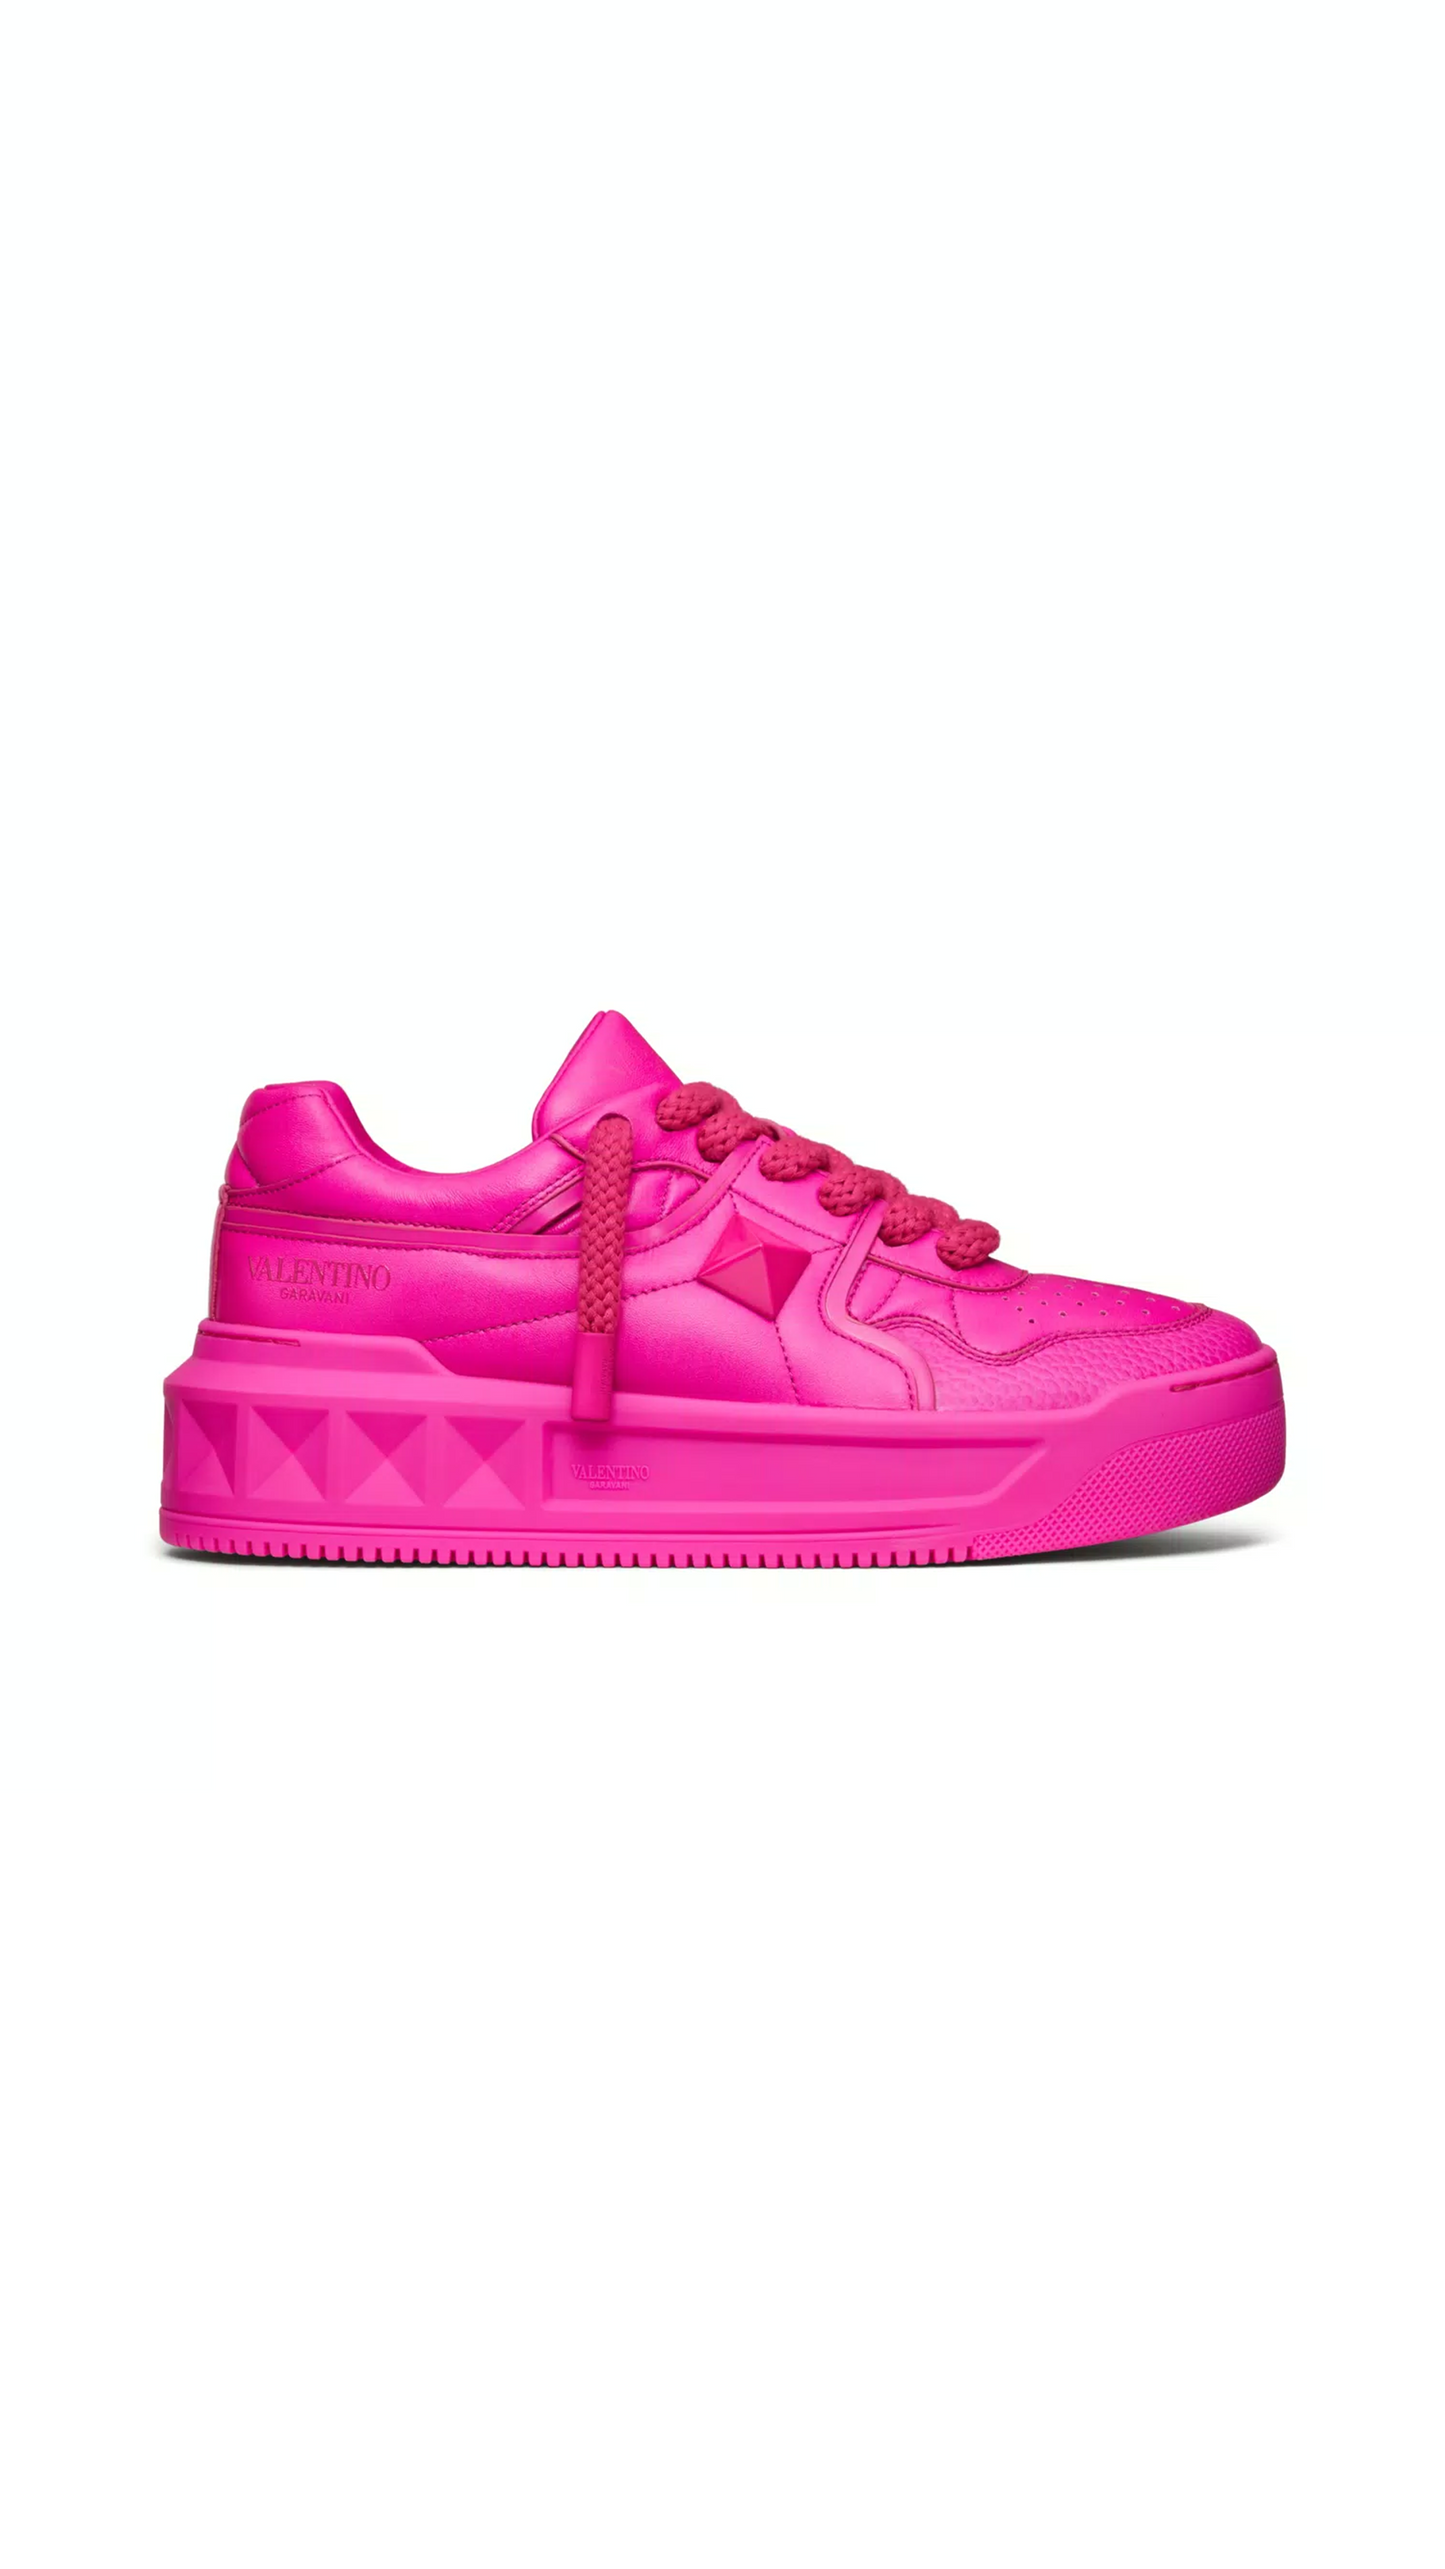 One Stud XL Sneaker in Nappa Leather - Pink PP